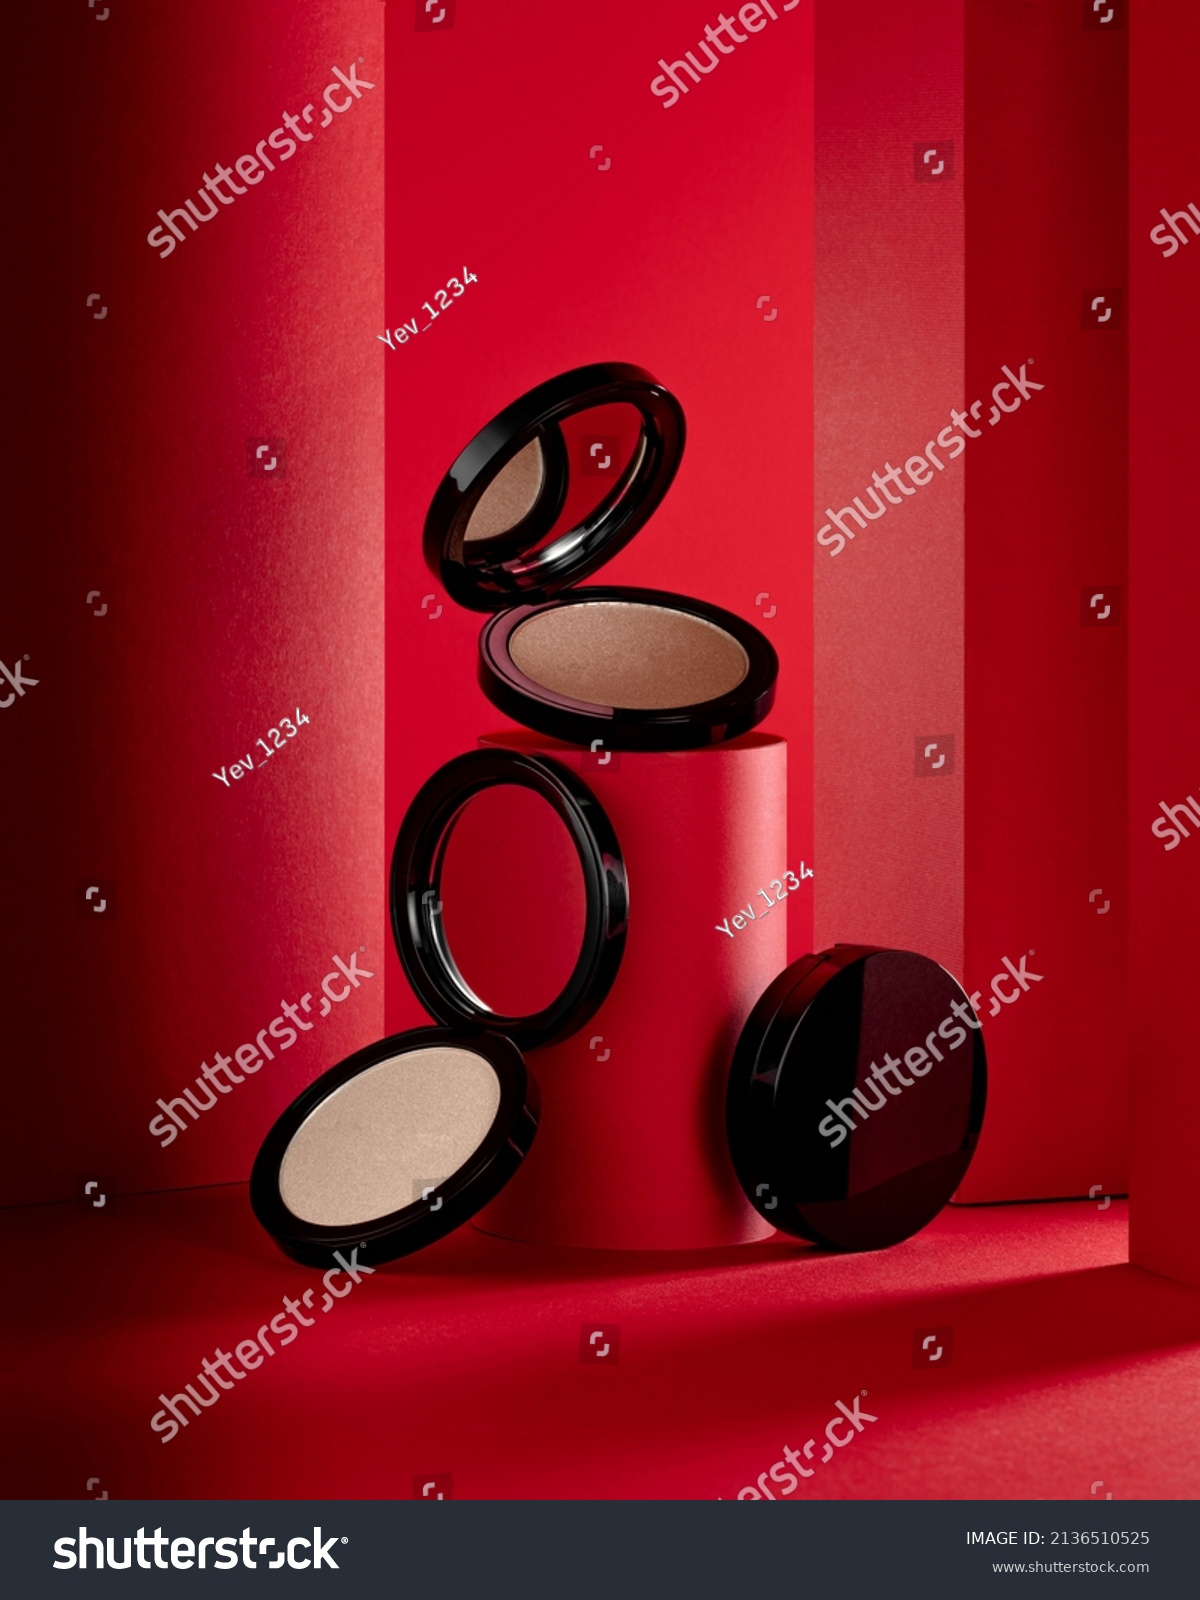 Face highlighter compact makeup powder  cases with mirror. Cosmetic products advertisement on red decorative background with decorated tubes #2136510525